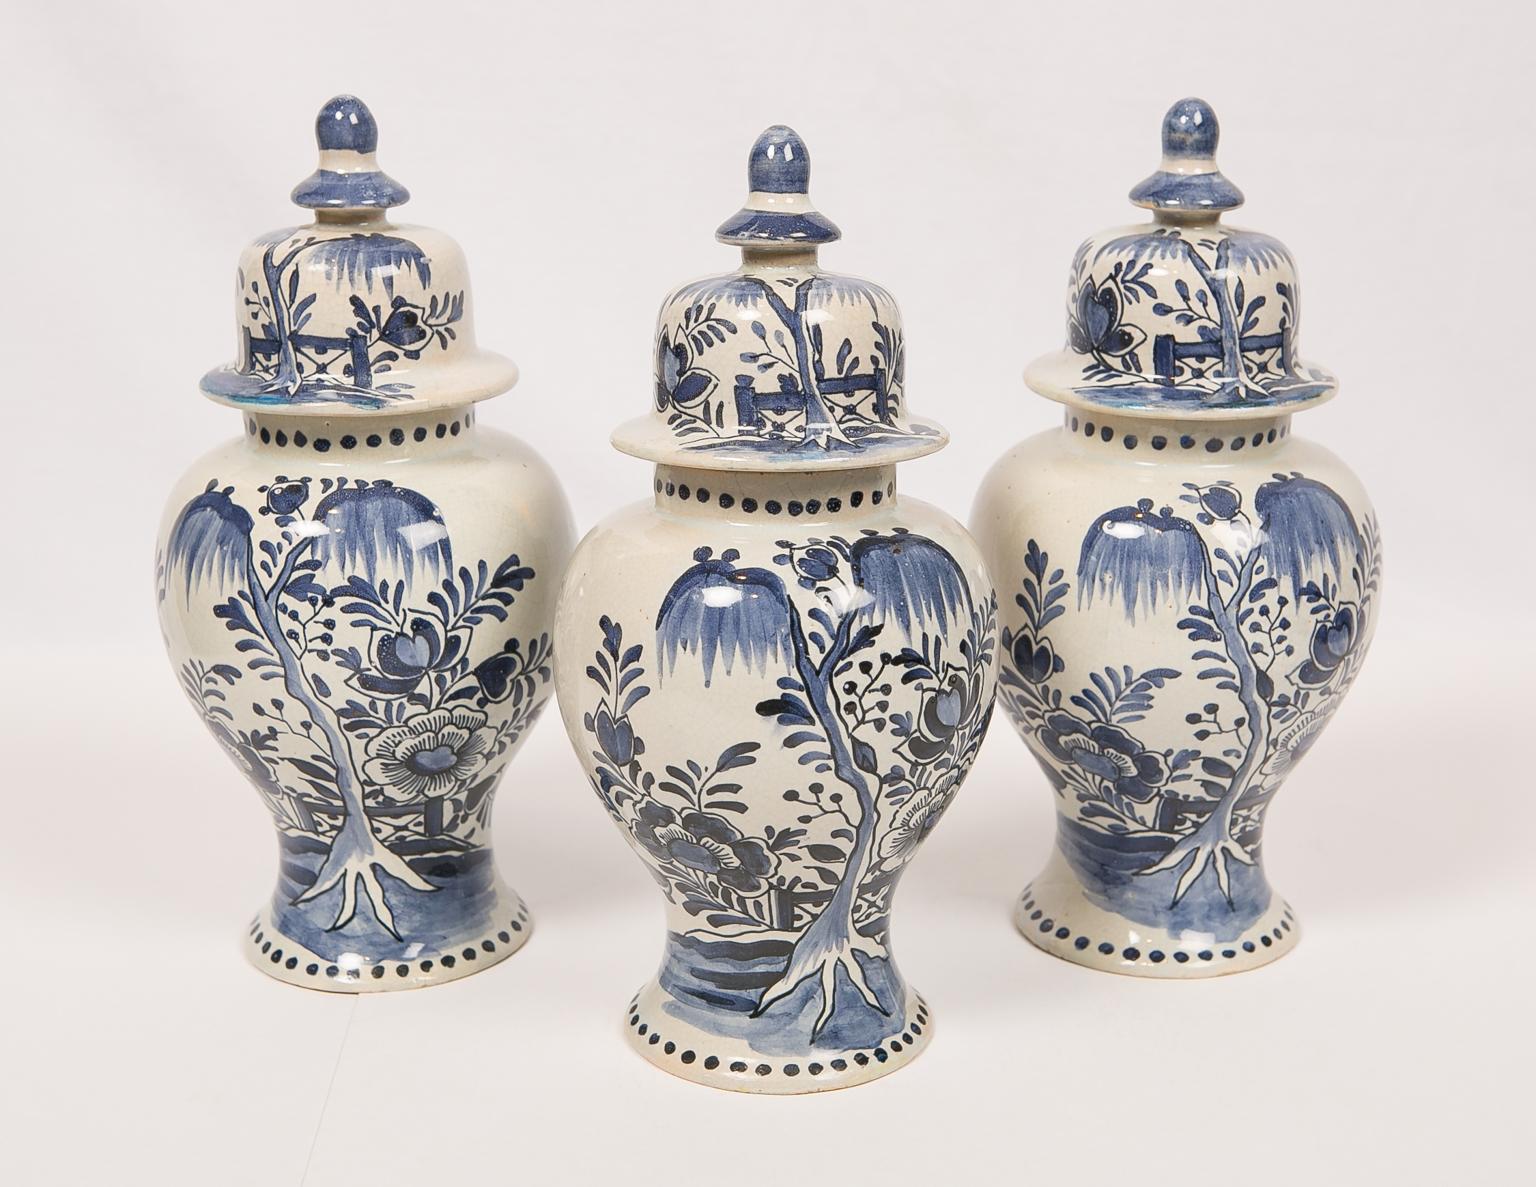 A set of three blue and white Dutch Delft style mantle jars made in the Netherlands. The jars are well potted. Painted in medium blue tones they show a chinoiserie scene with a flowering tree in a fenced-in garden. Each jar is further decorated with